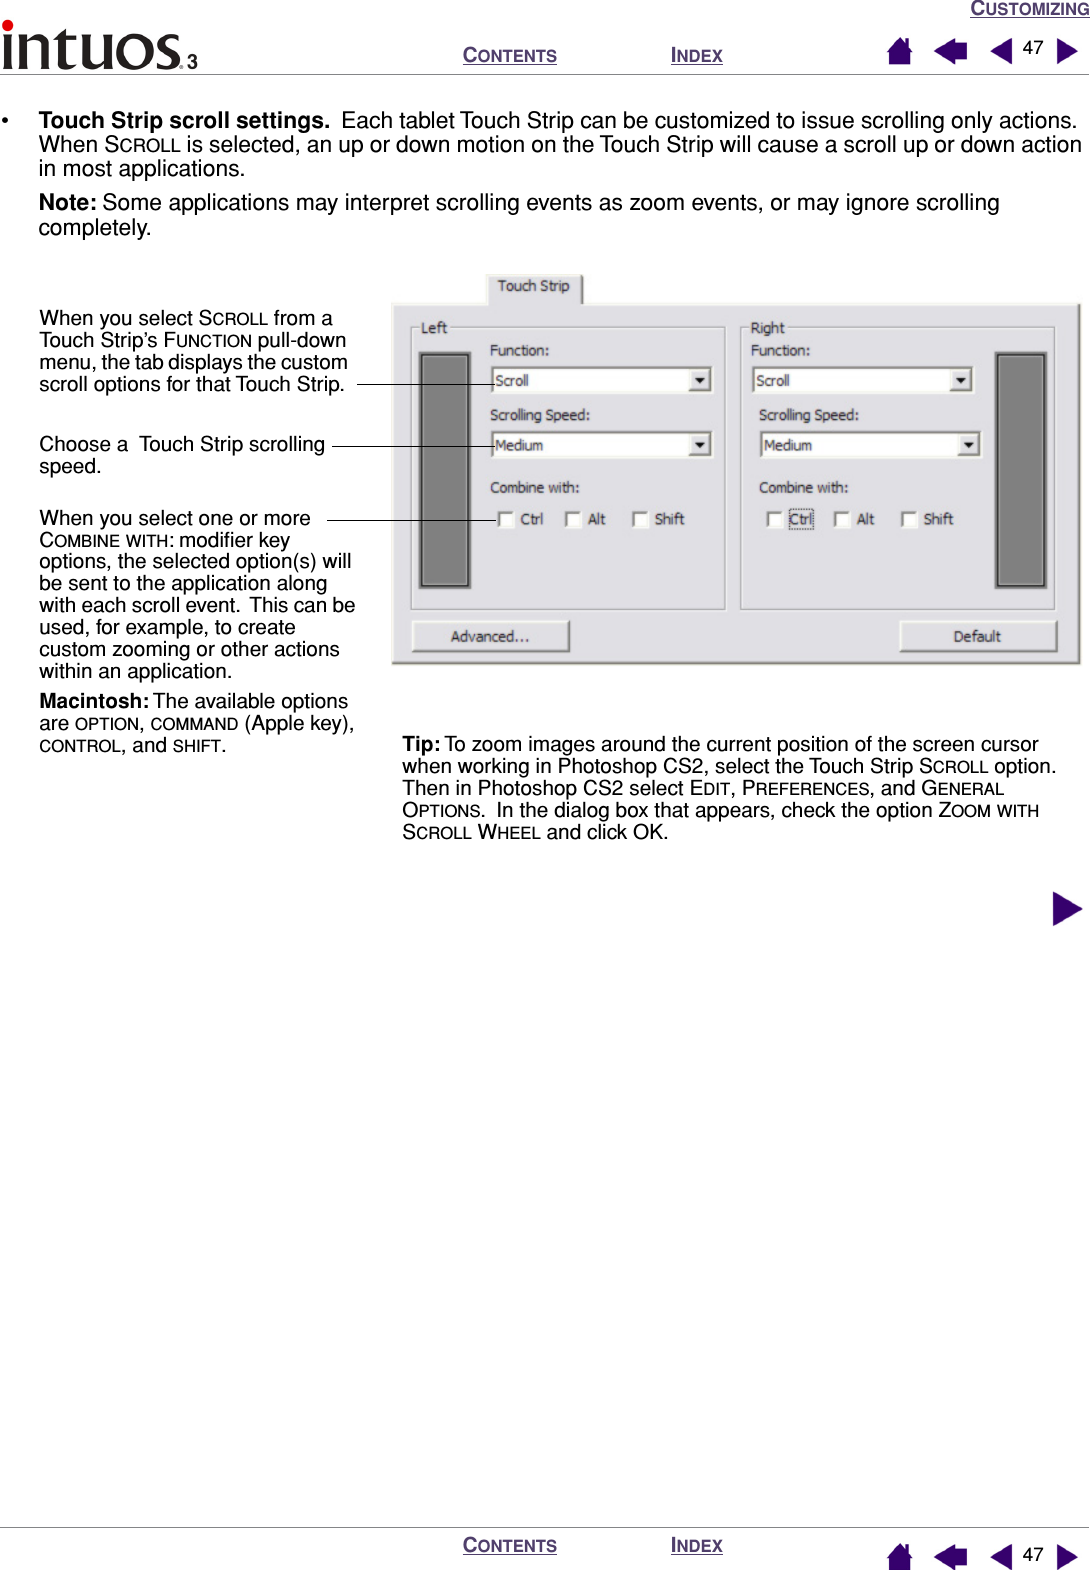 CUSTOMIZINGINDEXCONTENTSINDEXCONTENTS 4747•Touch Strip scroll settings.  Each tablet Touch Strip can be customized to issue scrolling only actions.  When SCROLL is selected, an up or down motion on the Touch Strip will cause a scroll up or down action in most applications.Note: Some applications may interpret scrolling events as zoom events, or may ignore scrolling completely.  When you select SCROLL from a Touch Strip’s FUNCTION pull-down menu, the tab displays the custom scroll options for that Touch Strip.Choose a  Touch Strip scrolling speed.When you select one or more COMBINE WITH: modiﬁer key options, the selected option(s) will be sent to the application along with each scroll event.  This can be used, for example, to create custom zooming or other actions within an application.Macintosh: The available options are OPTION, COMMAND (Apple key), CONTROL, and SHIFT.Tip: To zoom images around the current position of the screen cursor when working in Photoshop CS2, select the Touch Strip SCROLL option.  Then in Photoshop CS2 select EDIT, PREFERENCES, and GENERAL OPTIONS.  In the dialog box that appears, check the option ZOOM WITH SCROLL WHEEL and click OK.